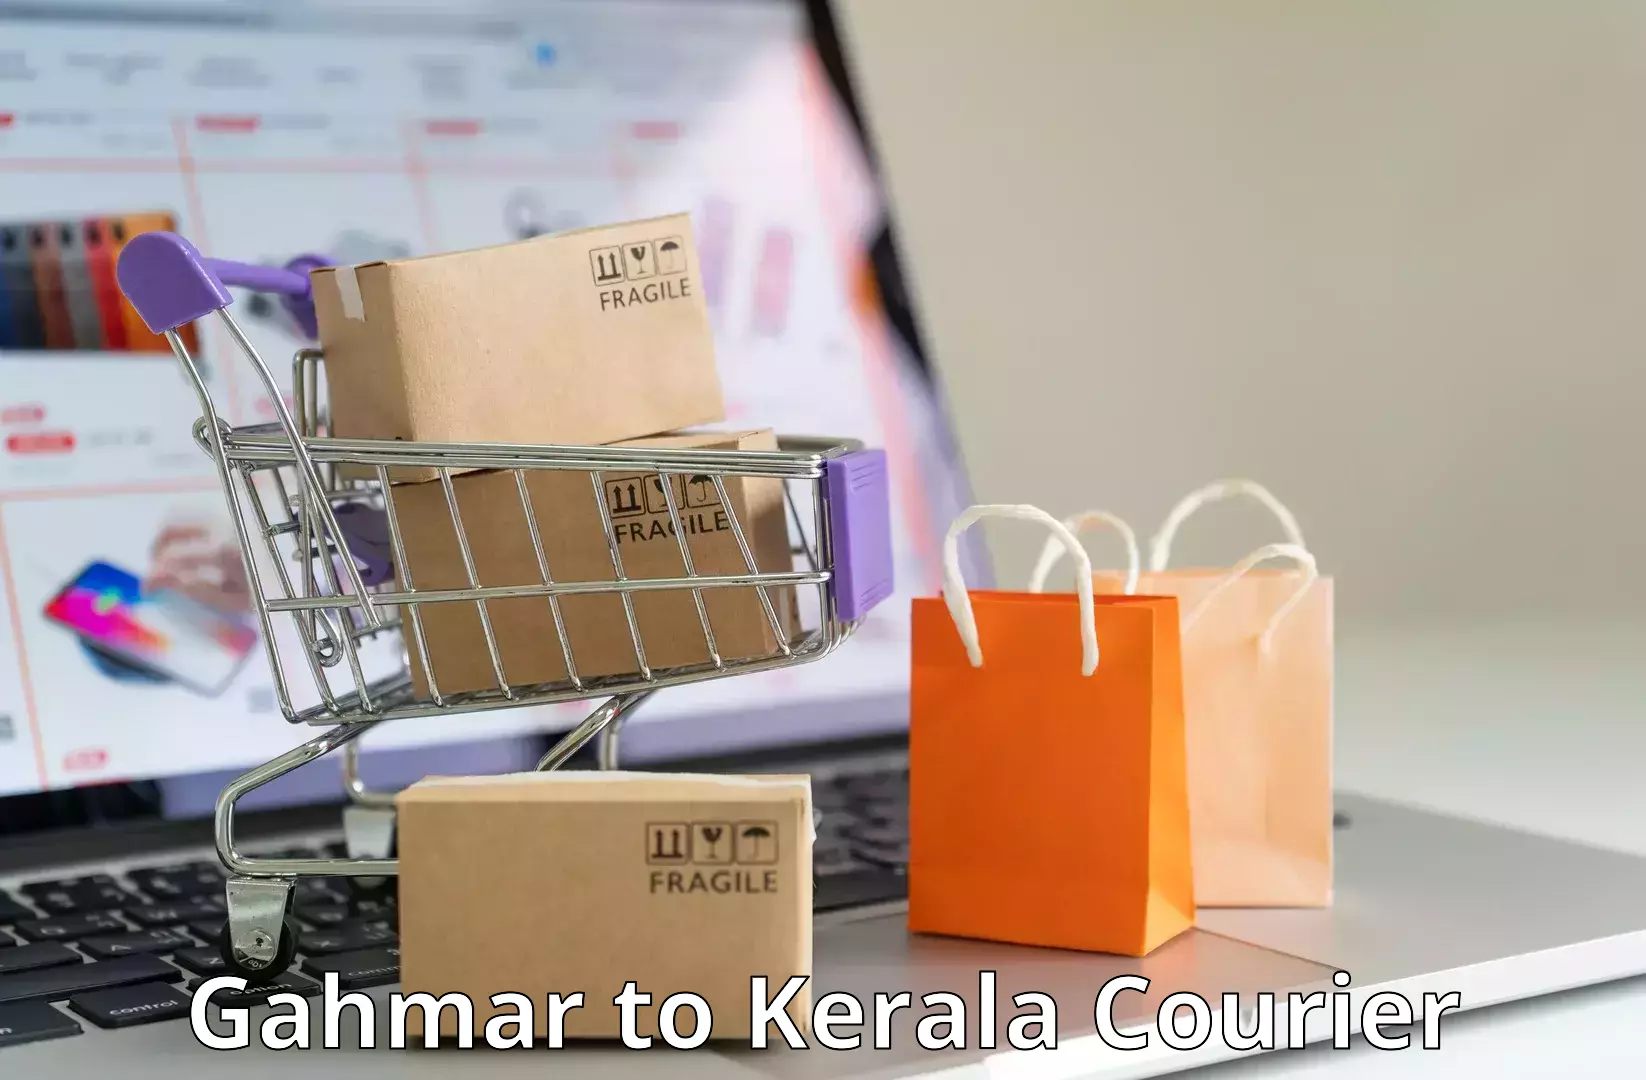 Easy access courier services in Gahmar to Cochin Port Kochi